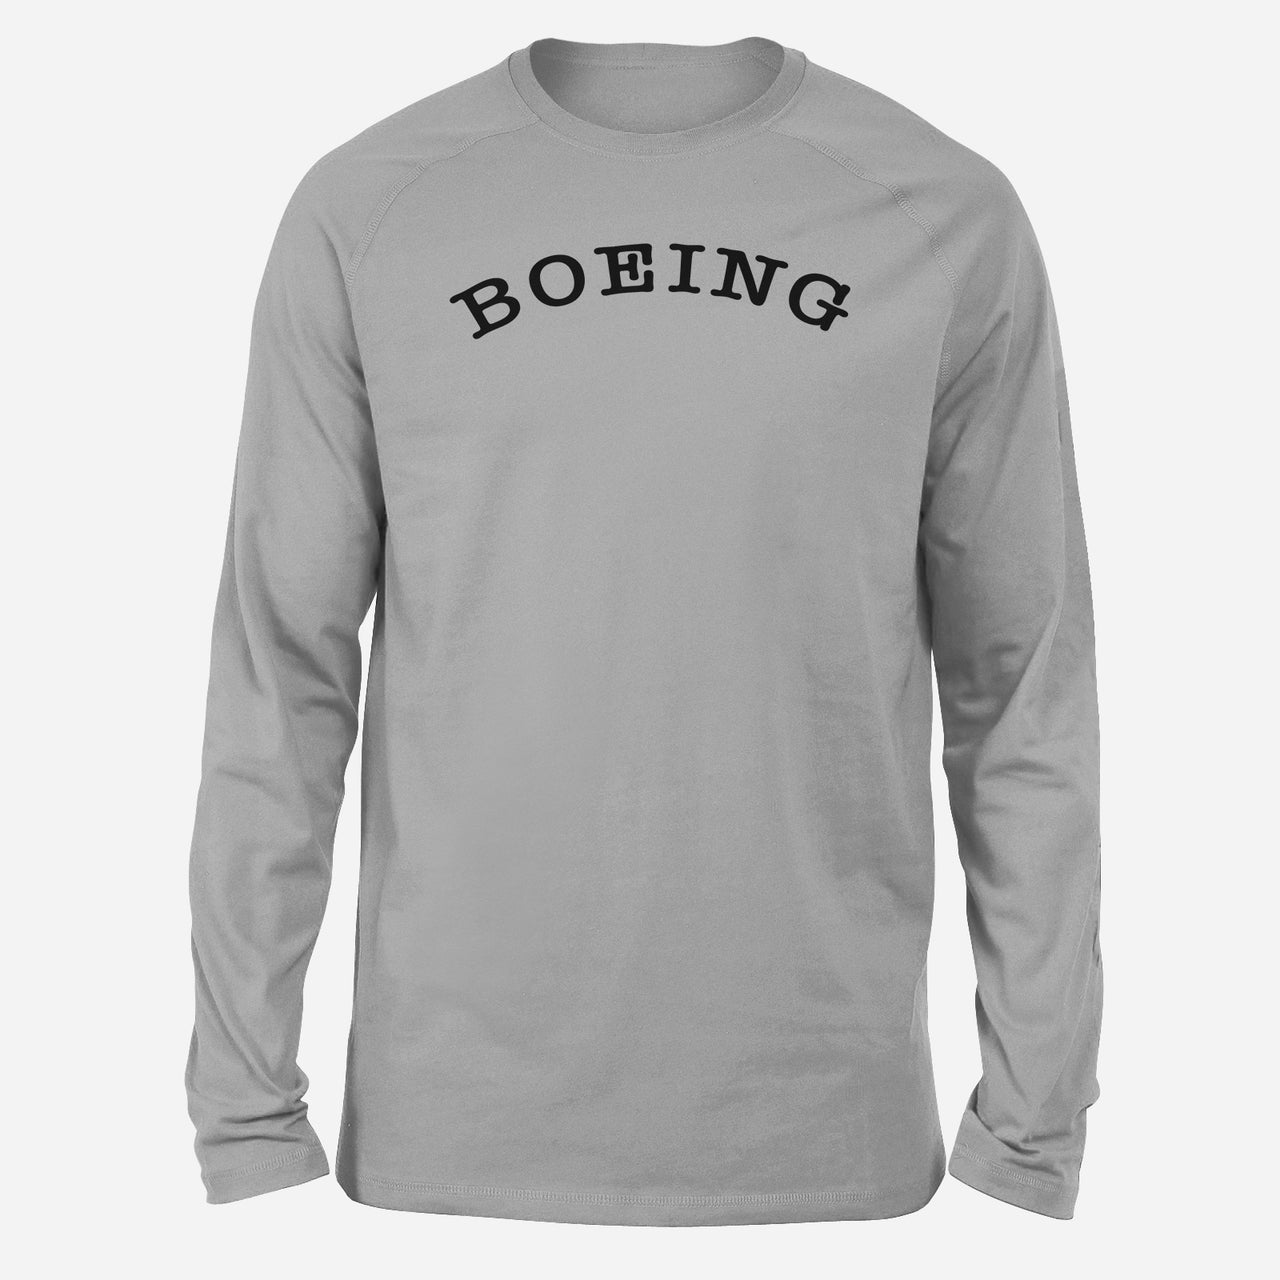 Special BOEING Text Designed Long-Sleeve T-Shirts